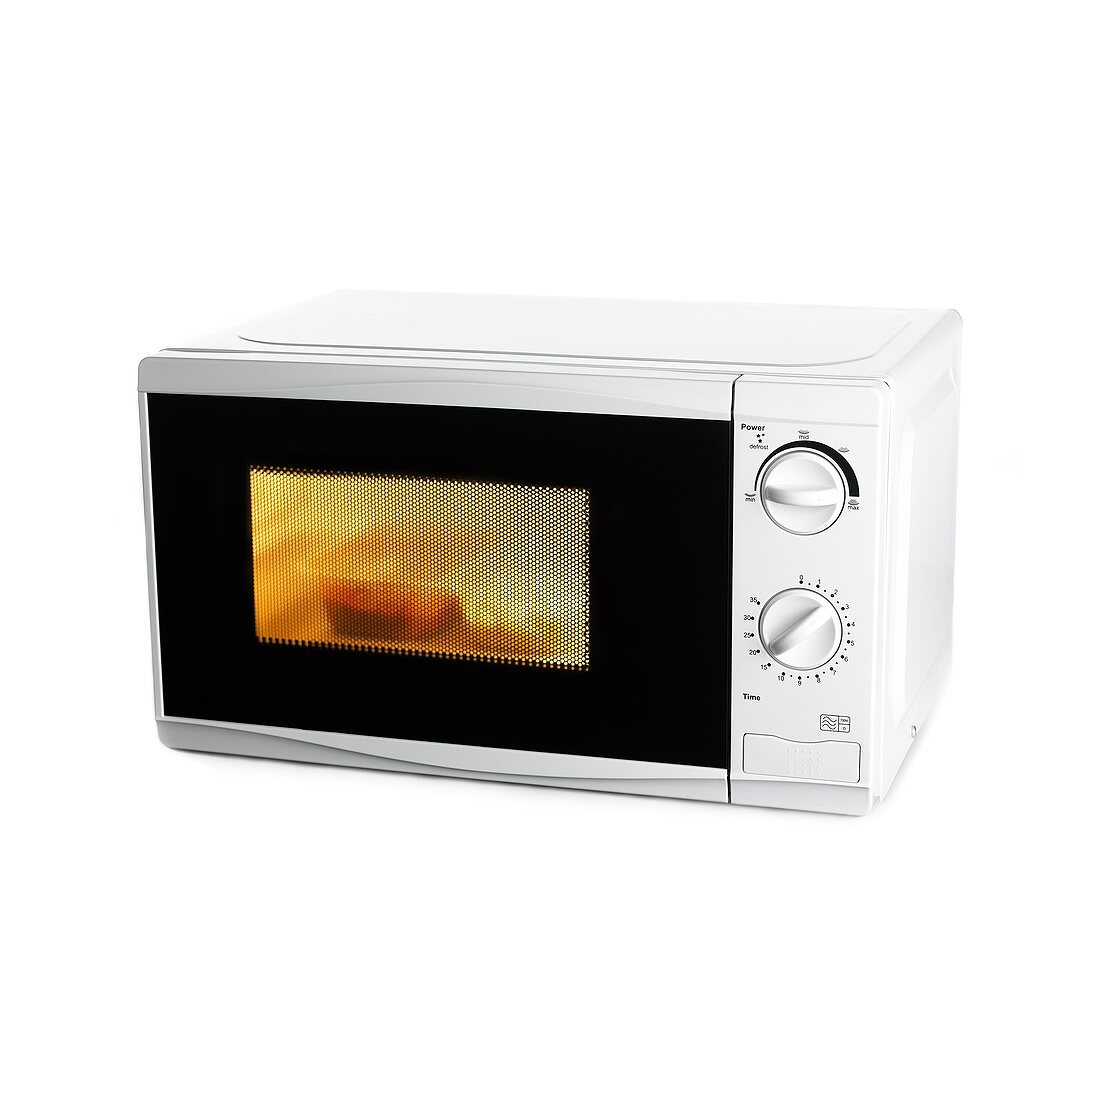 Domestic microwave oven